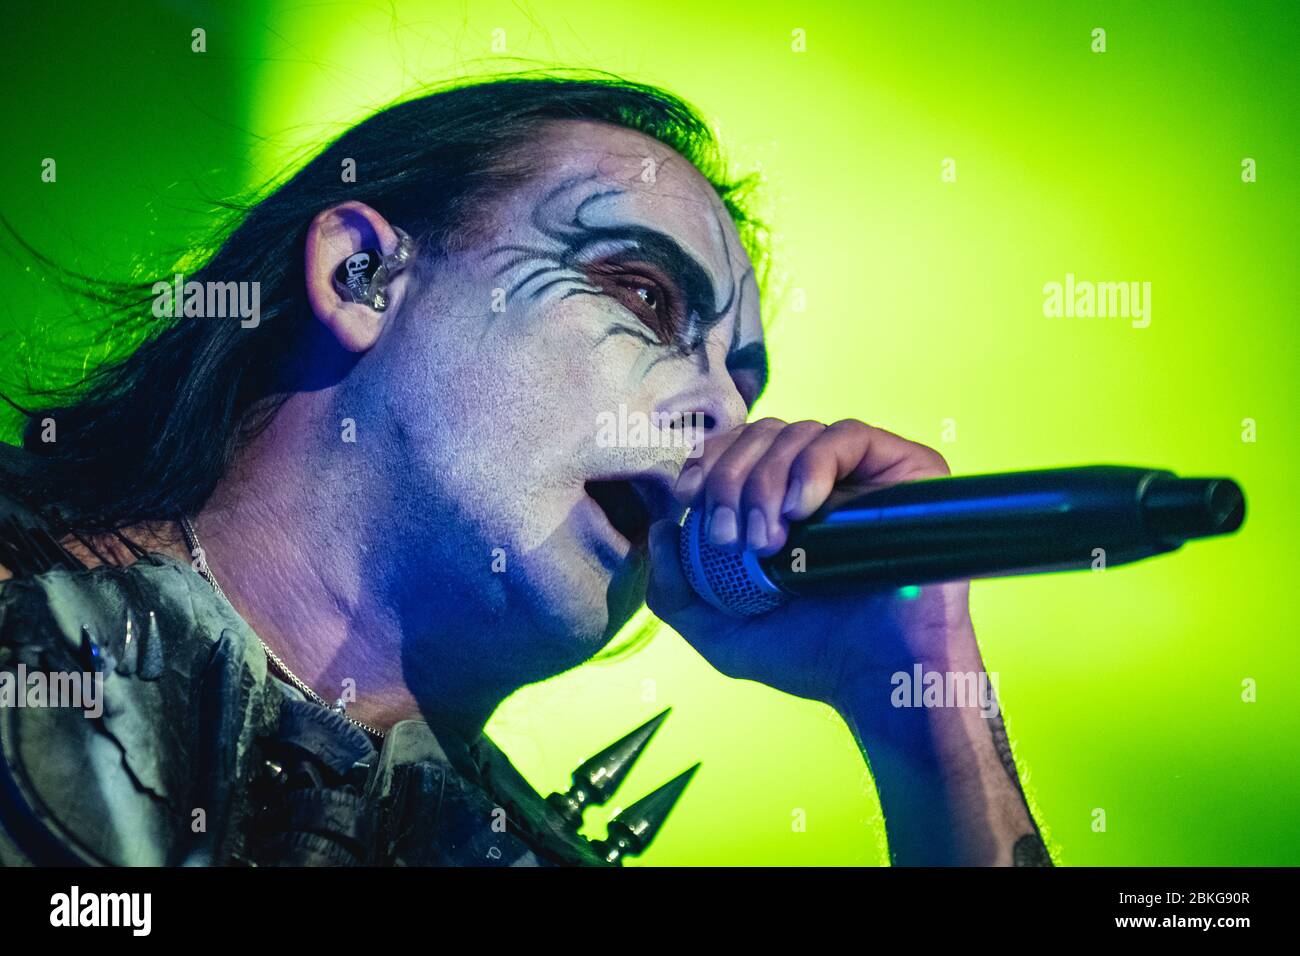 Odense, Denmark. 03th, March 2018. The English extreme metal band Cradle of Filth performs a live concert at Posten in Odense. Here vocalist Dani Filth is seen live on stage. (Photo credit: Gonzales Photo – Nikolaj Bransholm). Stock Photo